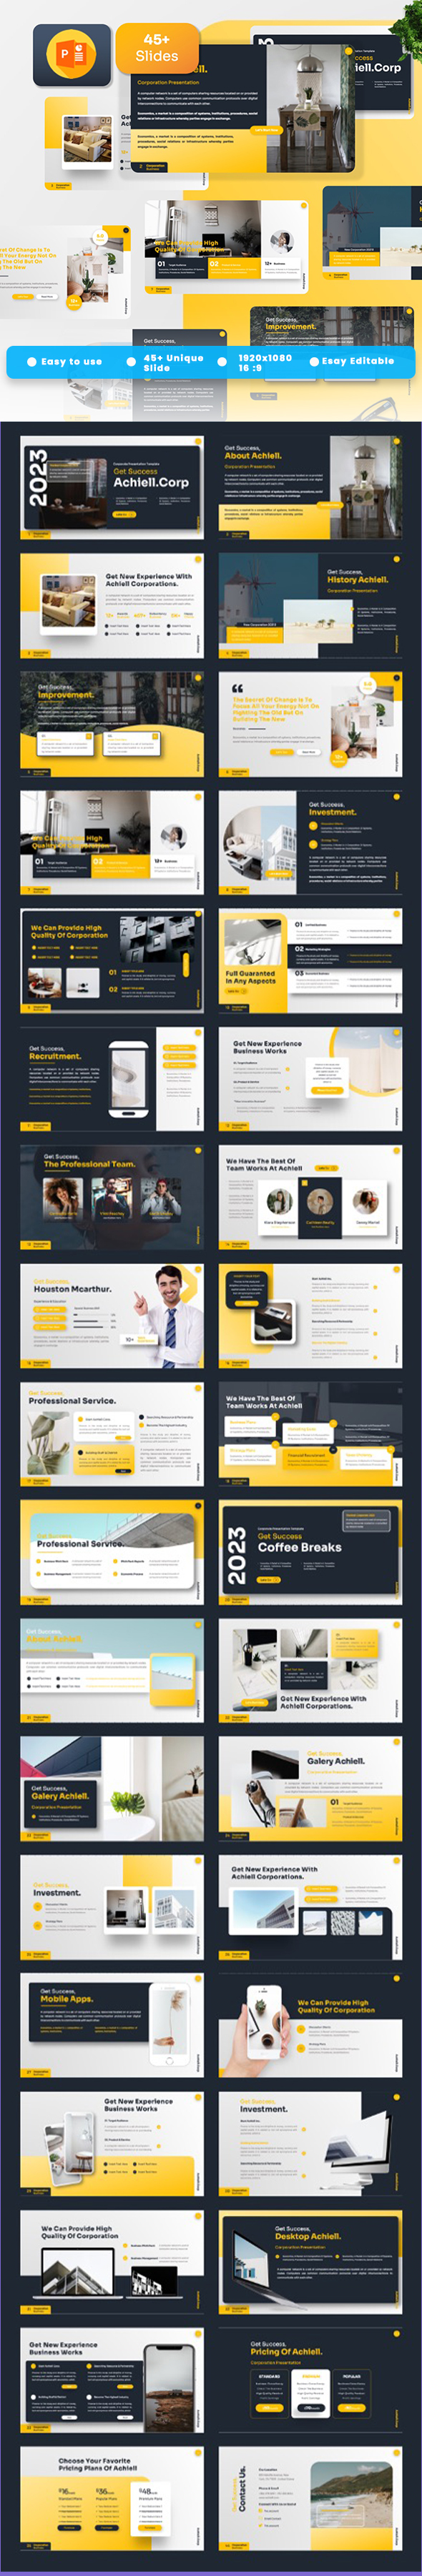 Achiell - Corporate Powerpoint Templates